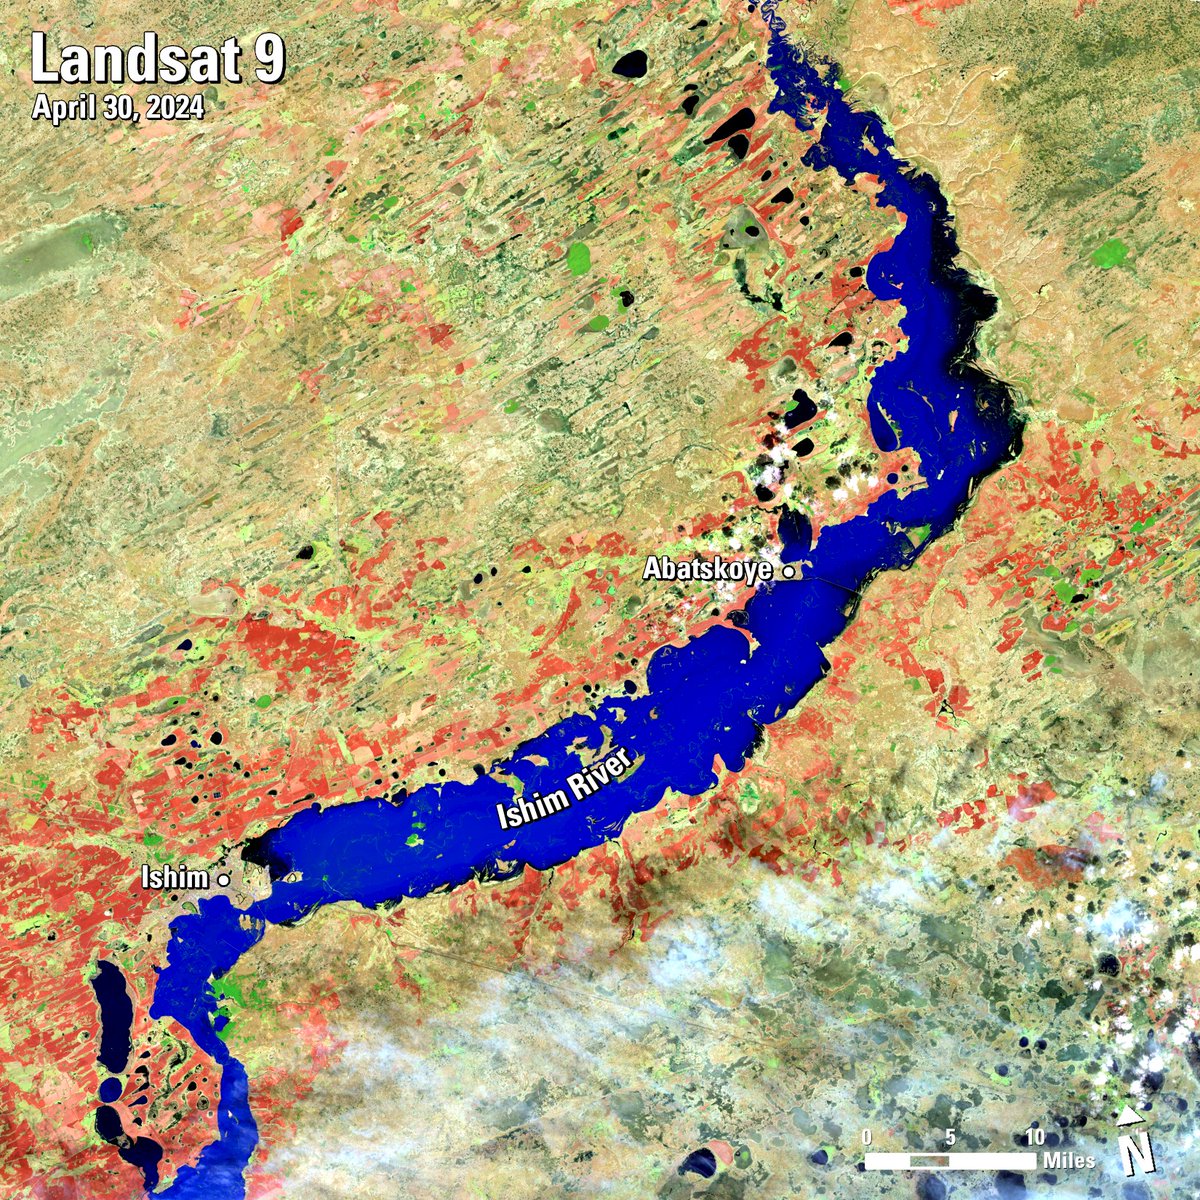 Unseasonably warm temperatures, melting snow, and heavy rainfall have triggered record-breaking #floods in #Russia and #Kazakhstan. #Landsat recently captured the floodwaters of the #IshimRiver surging north toward the village of #Abatskoye.